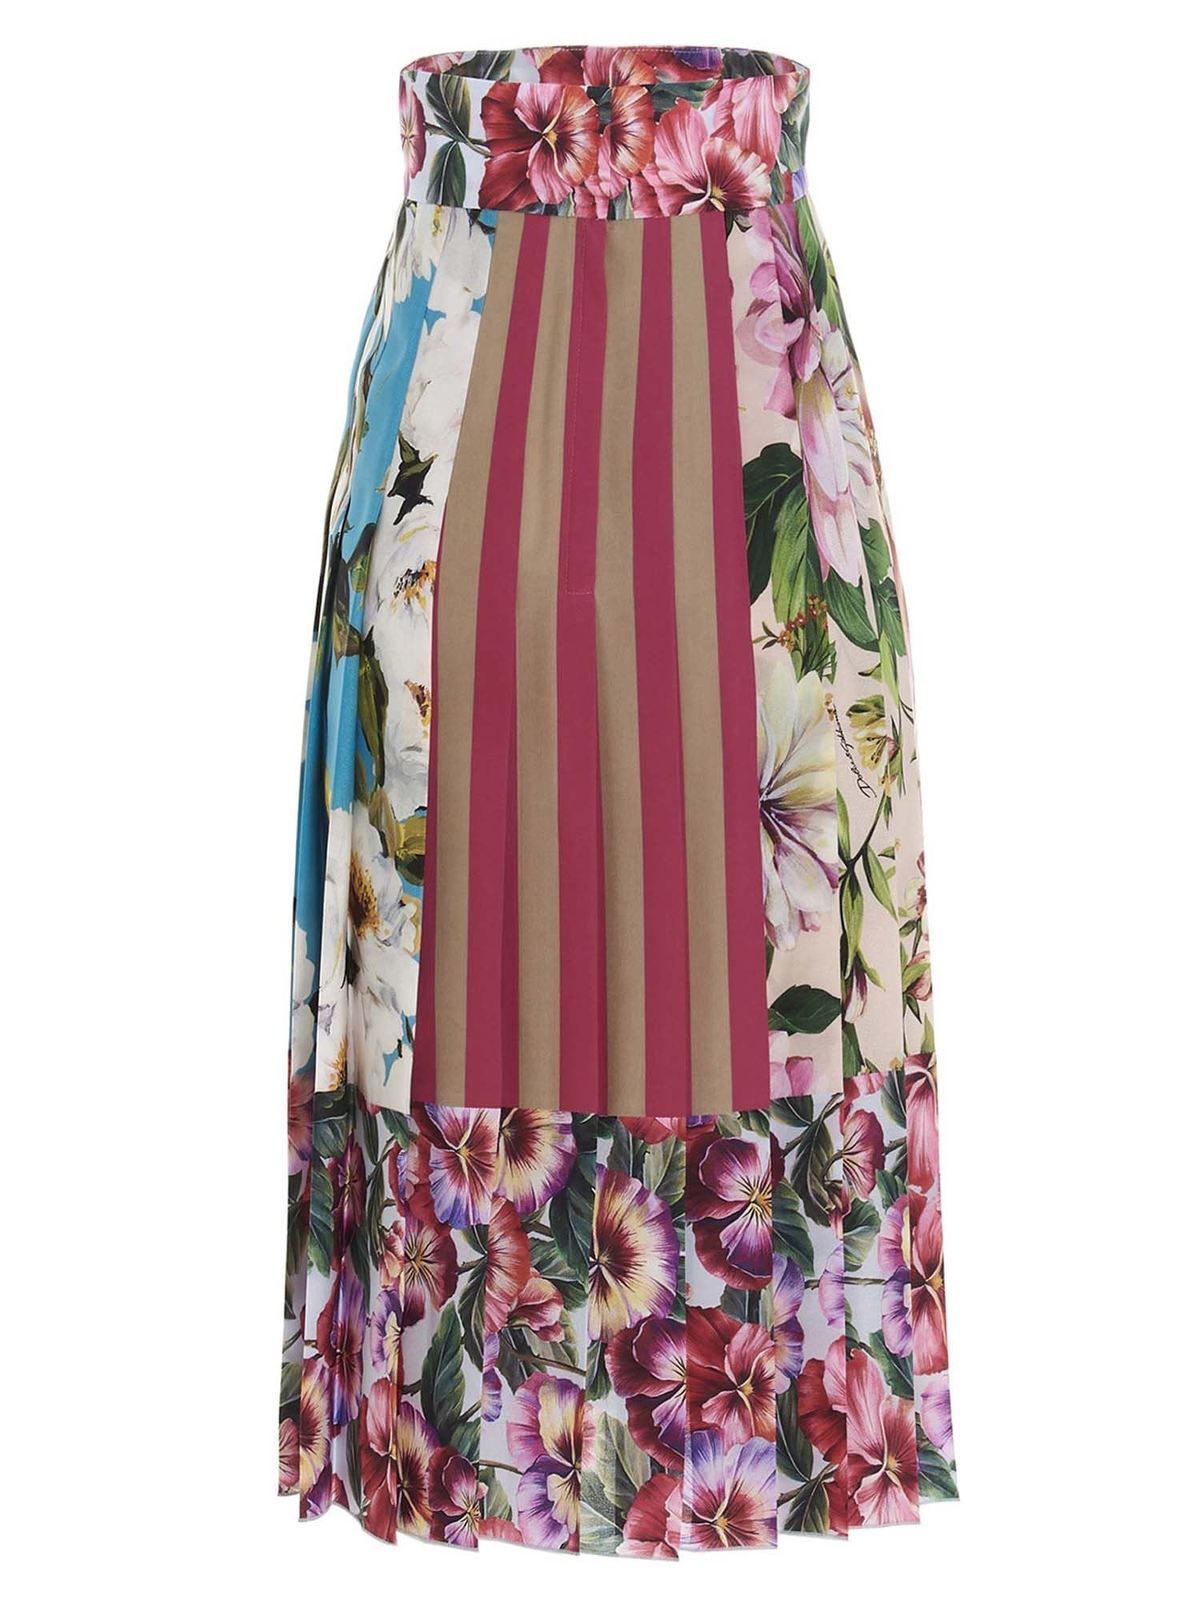 DOLCE & GABBANA PATCHWORK LONG SKIRT IN MULTICOLOR